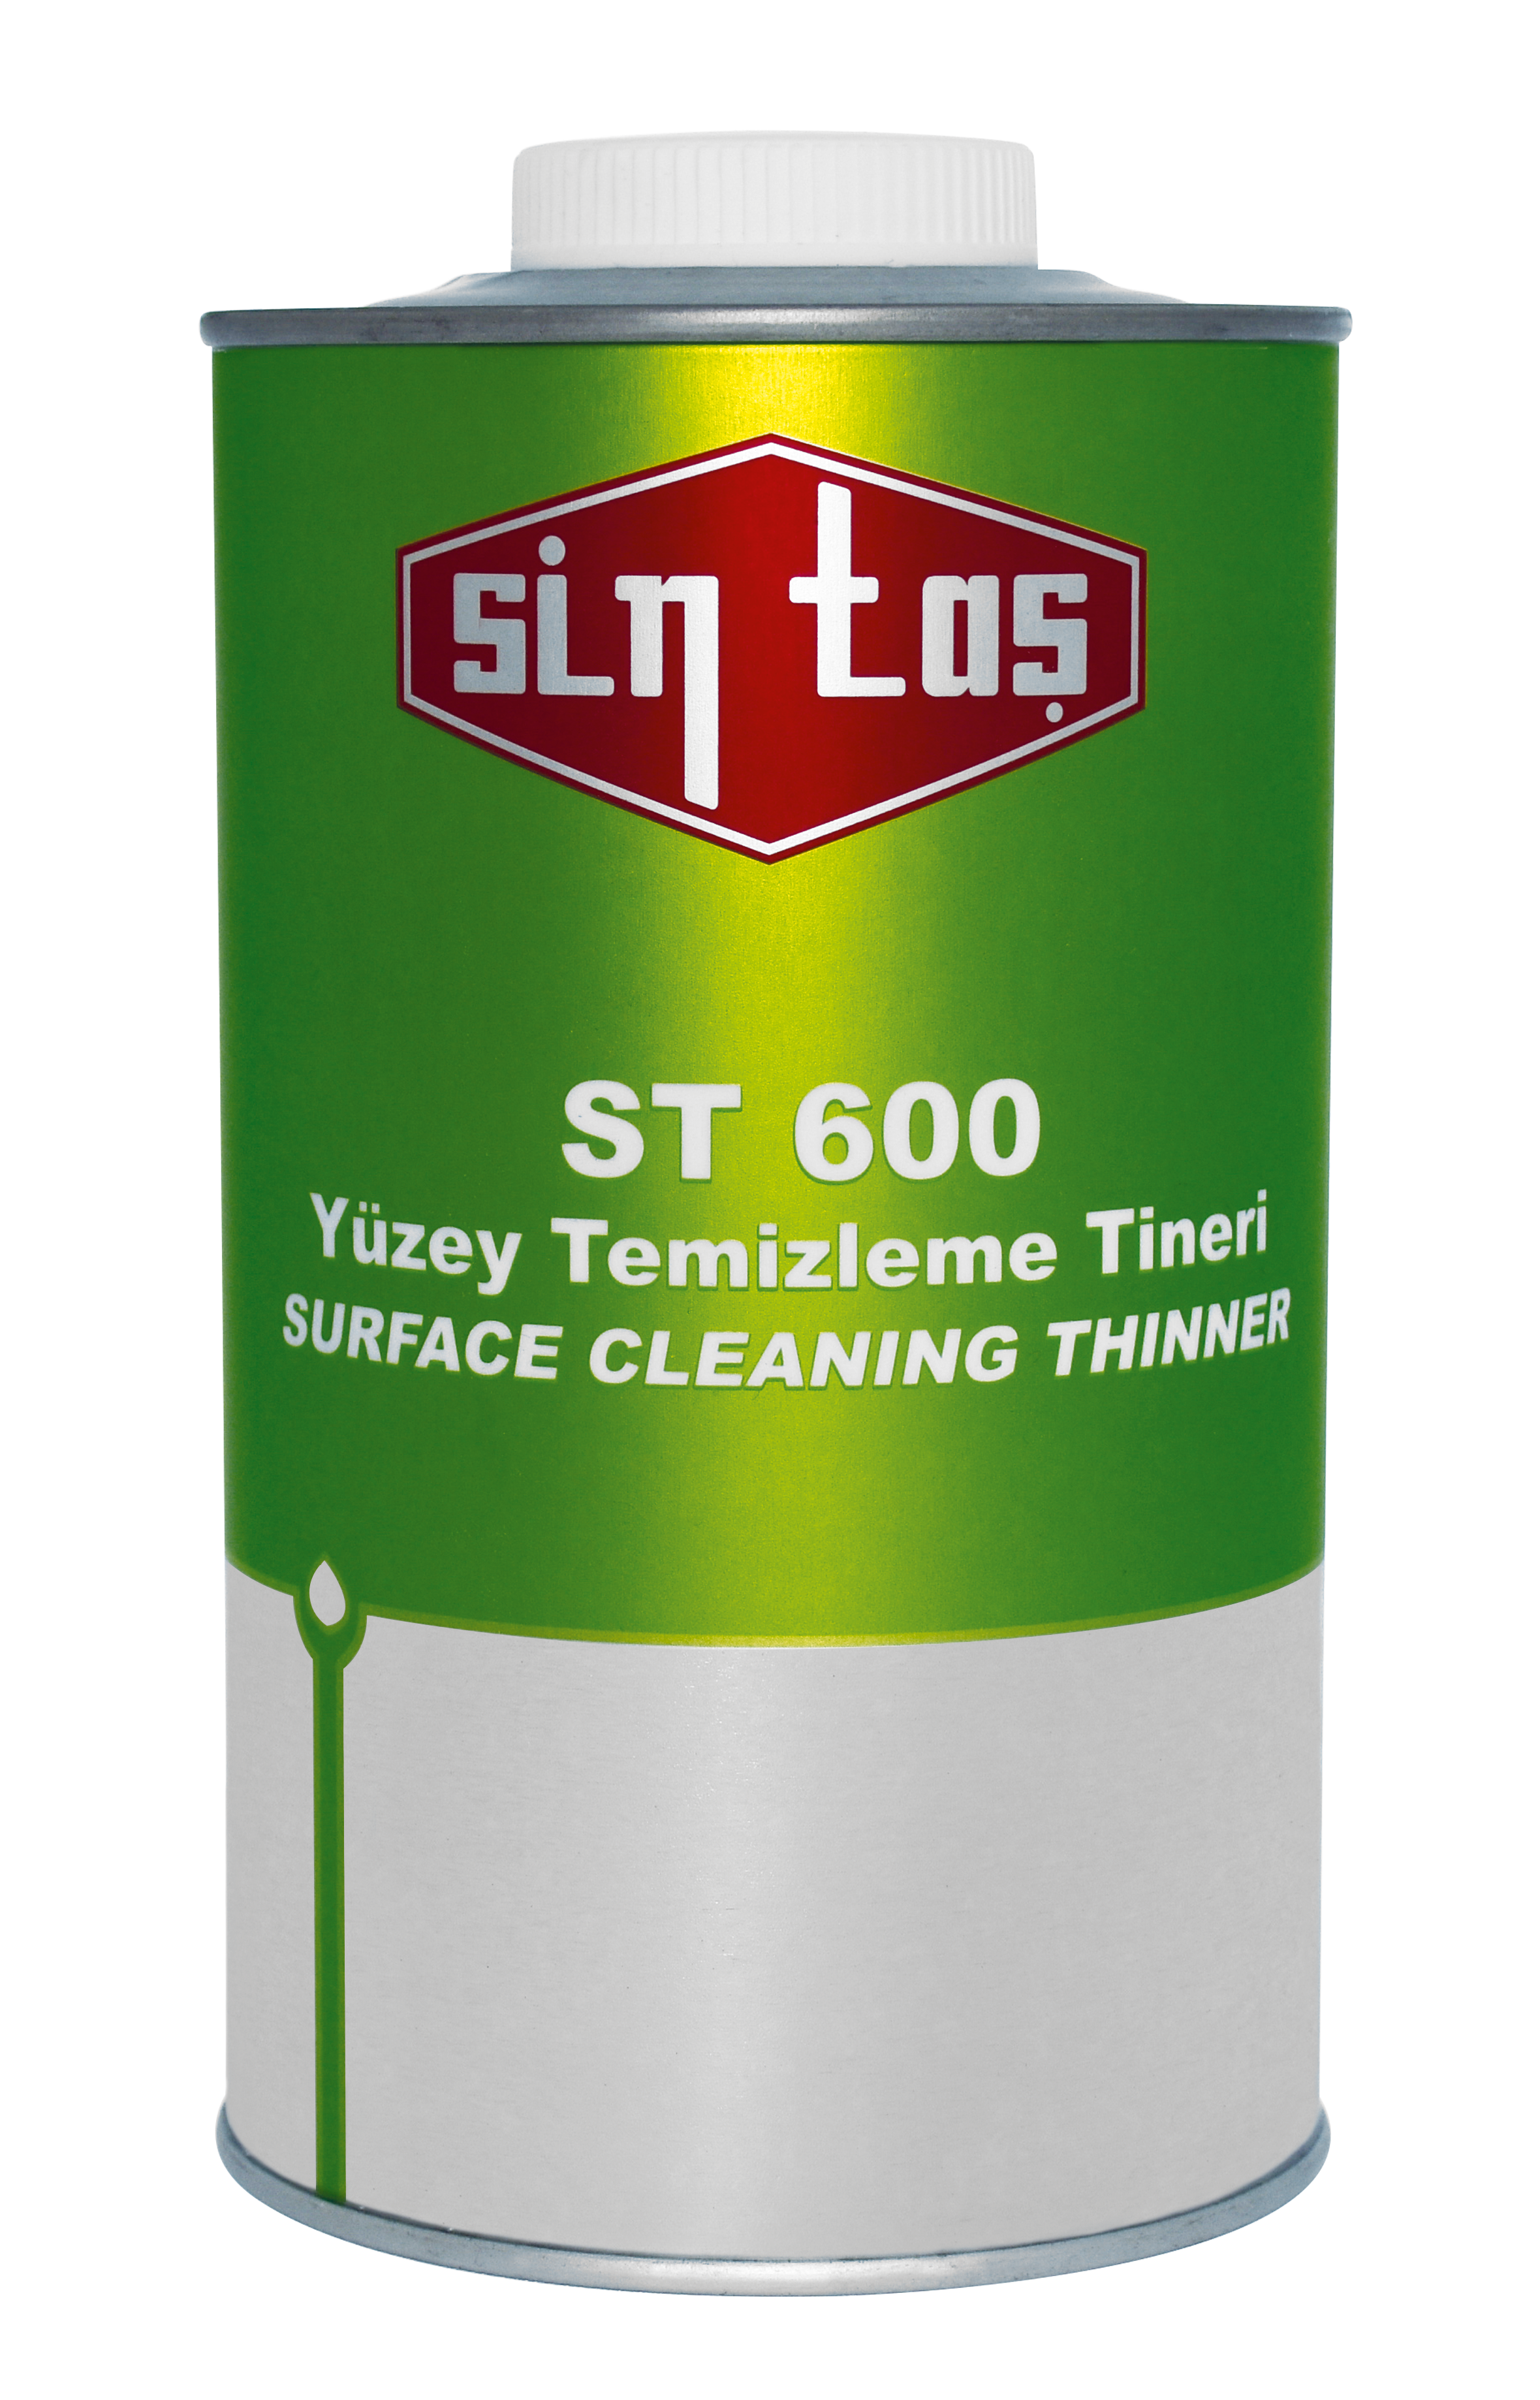 124 - Sintaş ST 600 Surface Cleaning Thinner